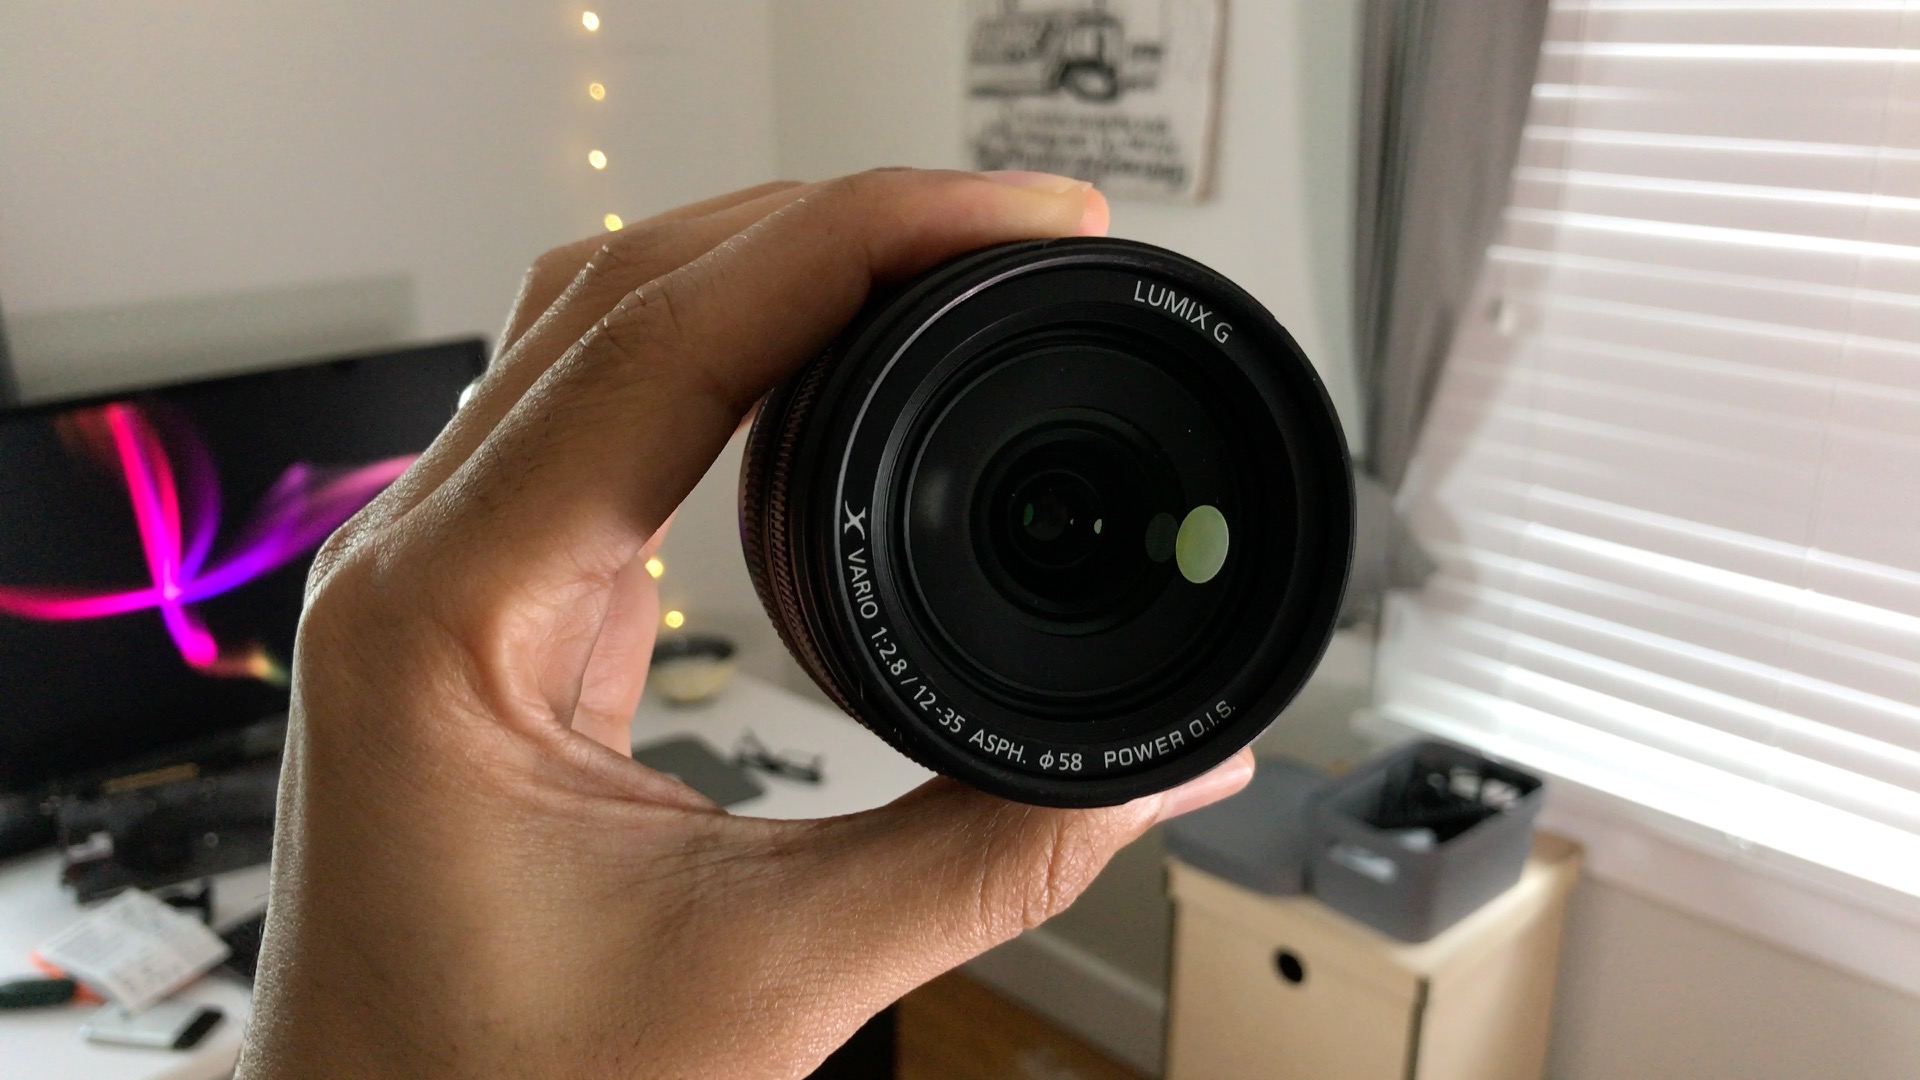 Panasonic Lumix G X Vario 12-35mm f/2.8: an awesome native lens for the